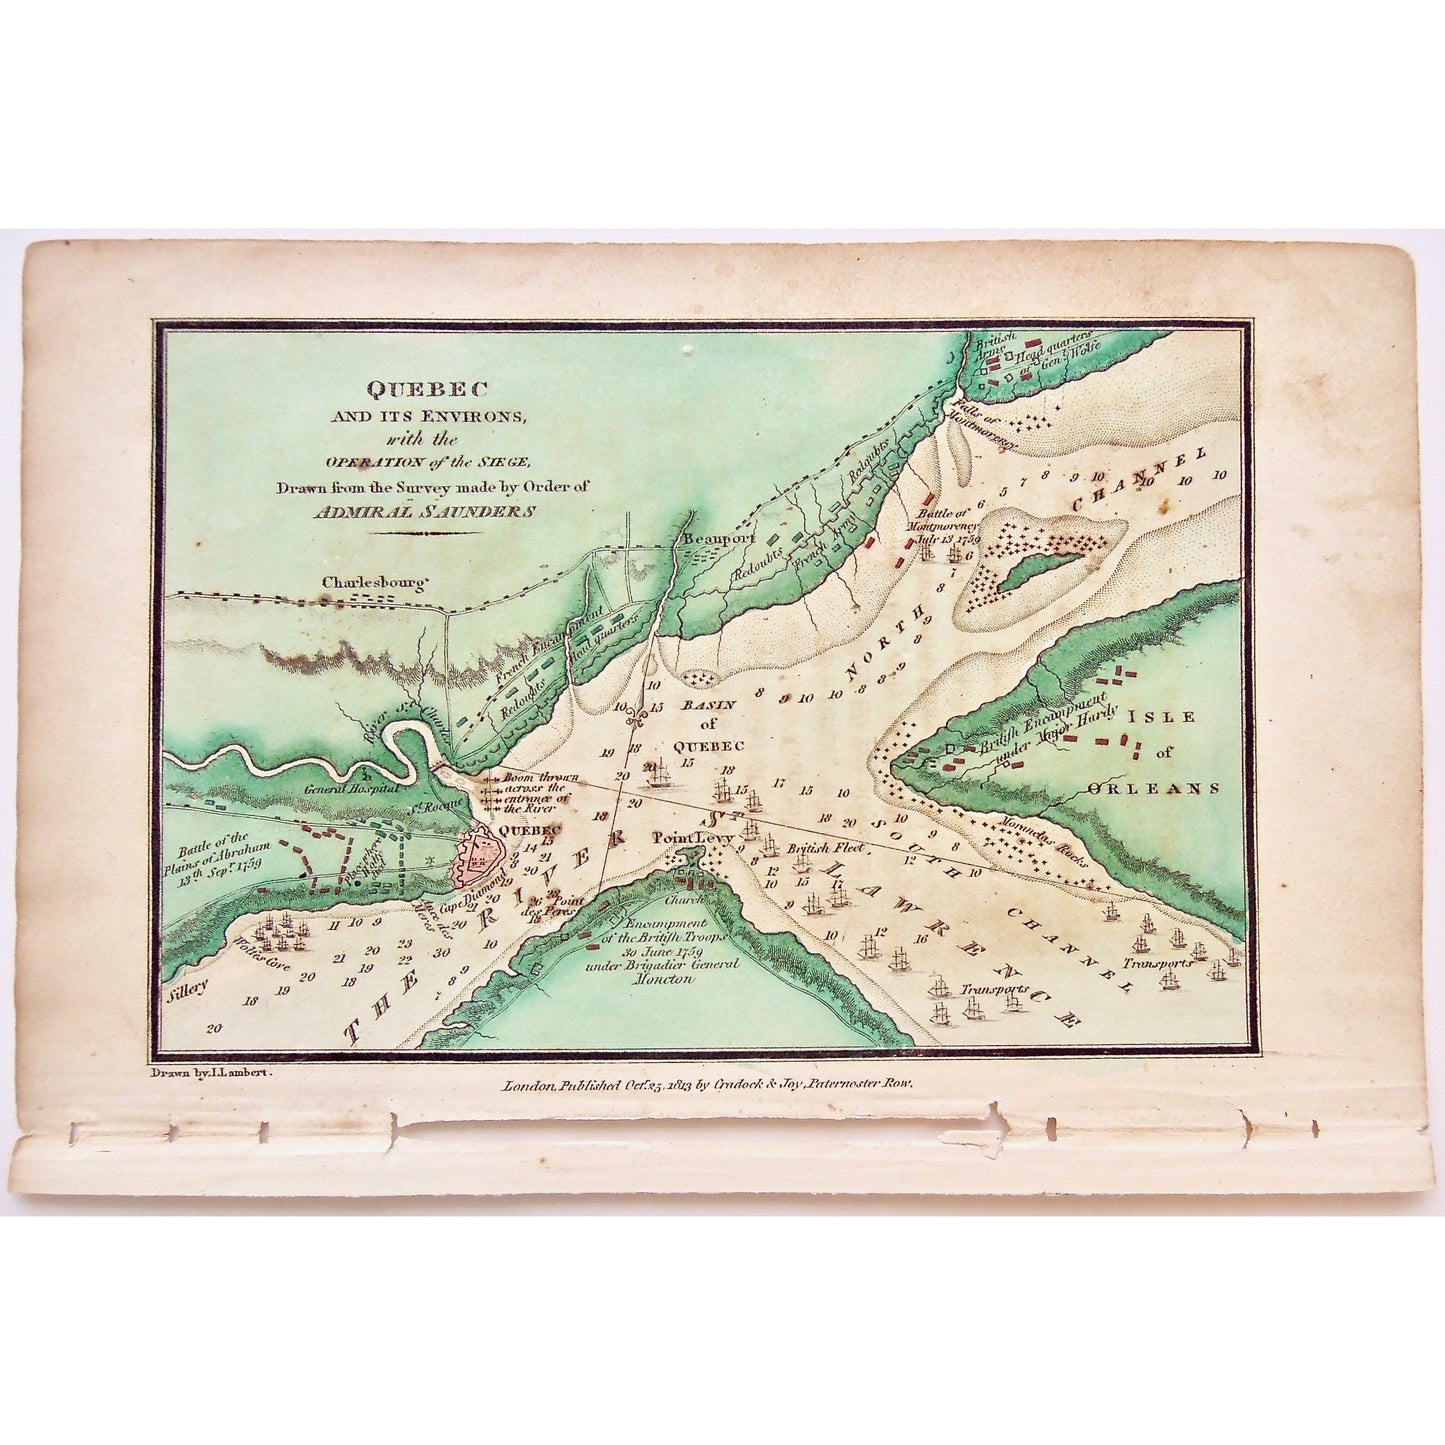 Quebec, Environs, Operation of the Siege, Siege, Operation, Admiral Saunders, Charlesbourg, Battle of the Plains of Abraham, Sept. 13, 1759, General Hospital, Sillery, River St. Lawrence, Basin of Quebec, Isle of Orleans, Isle d'Orleans, North Channel, Point Levy, Encampment of the British Troops, Encampment, British Troops, Place where Wolfe died, Wolfe, General Wolfe, General Moncton, Map, Maps, Mapping, Chart, Charts, Charting, Antique, Antique Map, Antique Print, Original maps, Vintage, Rare, Rare Maps,